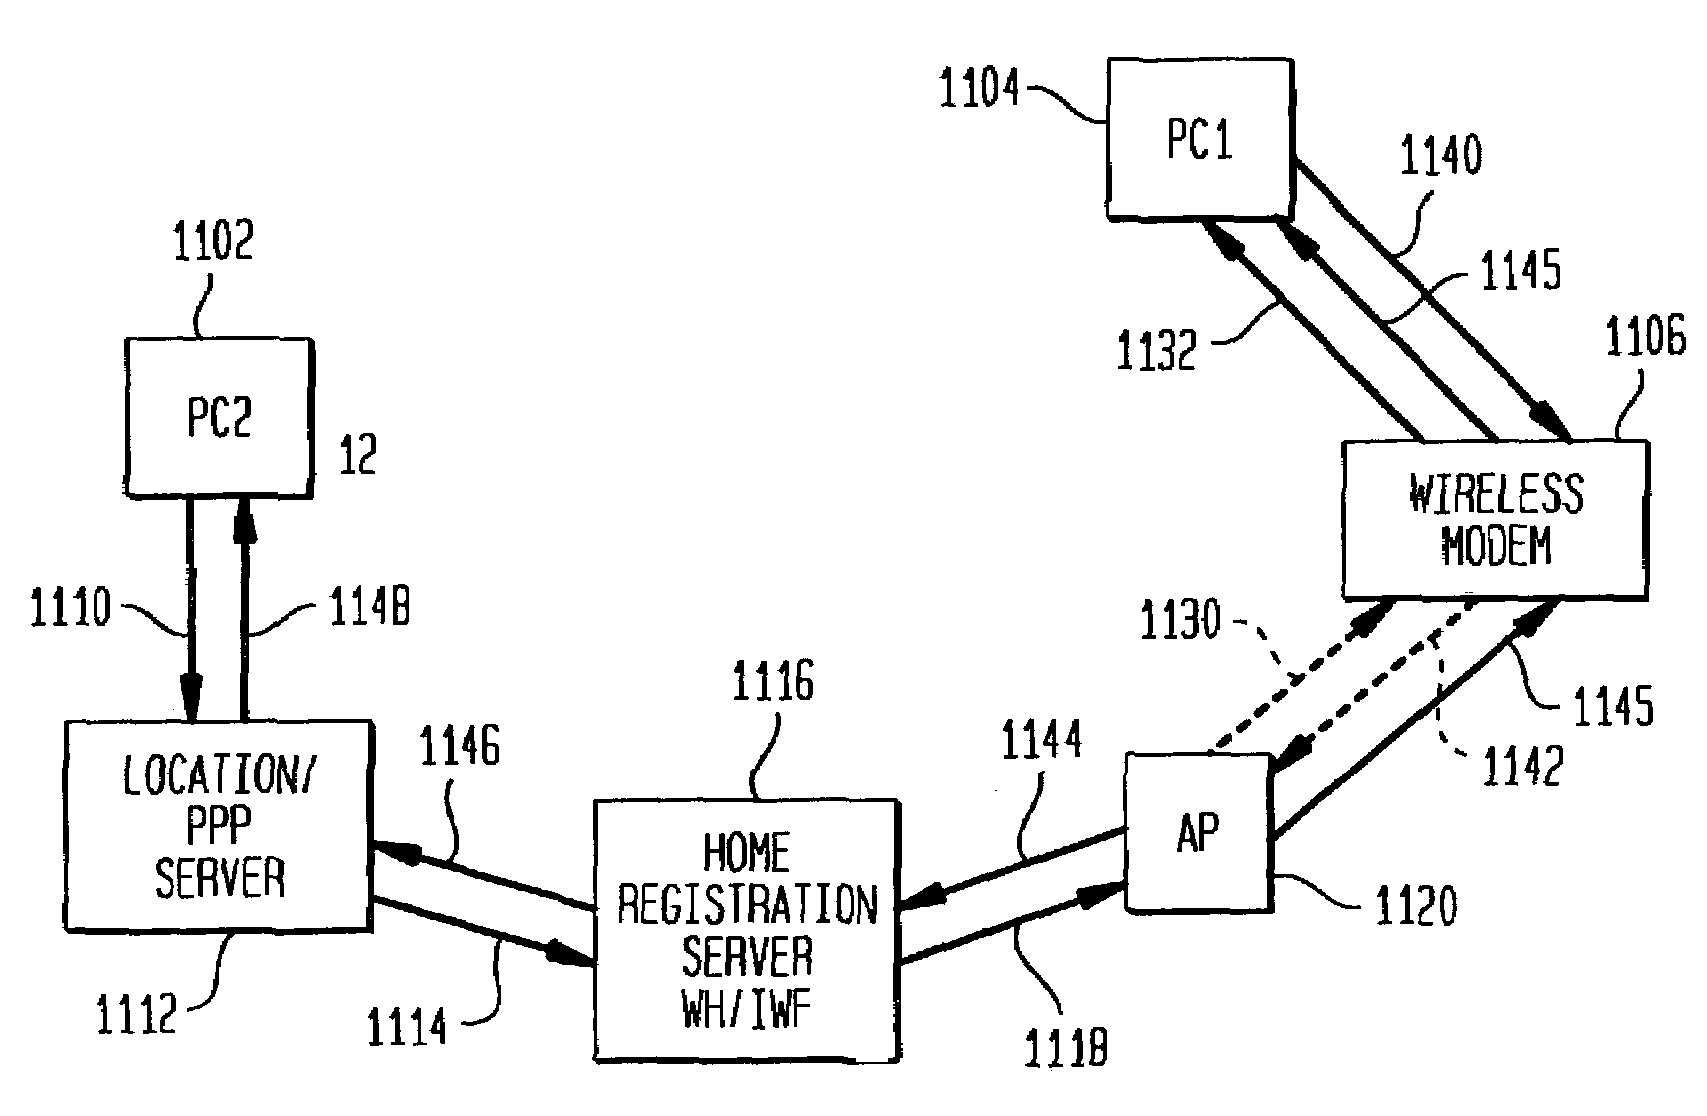 Method for paging a device in a wireless network